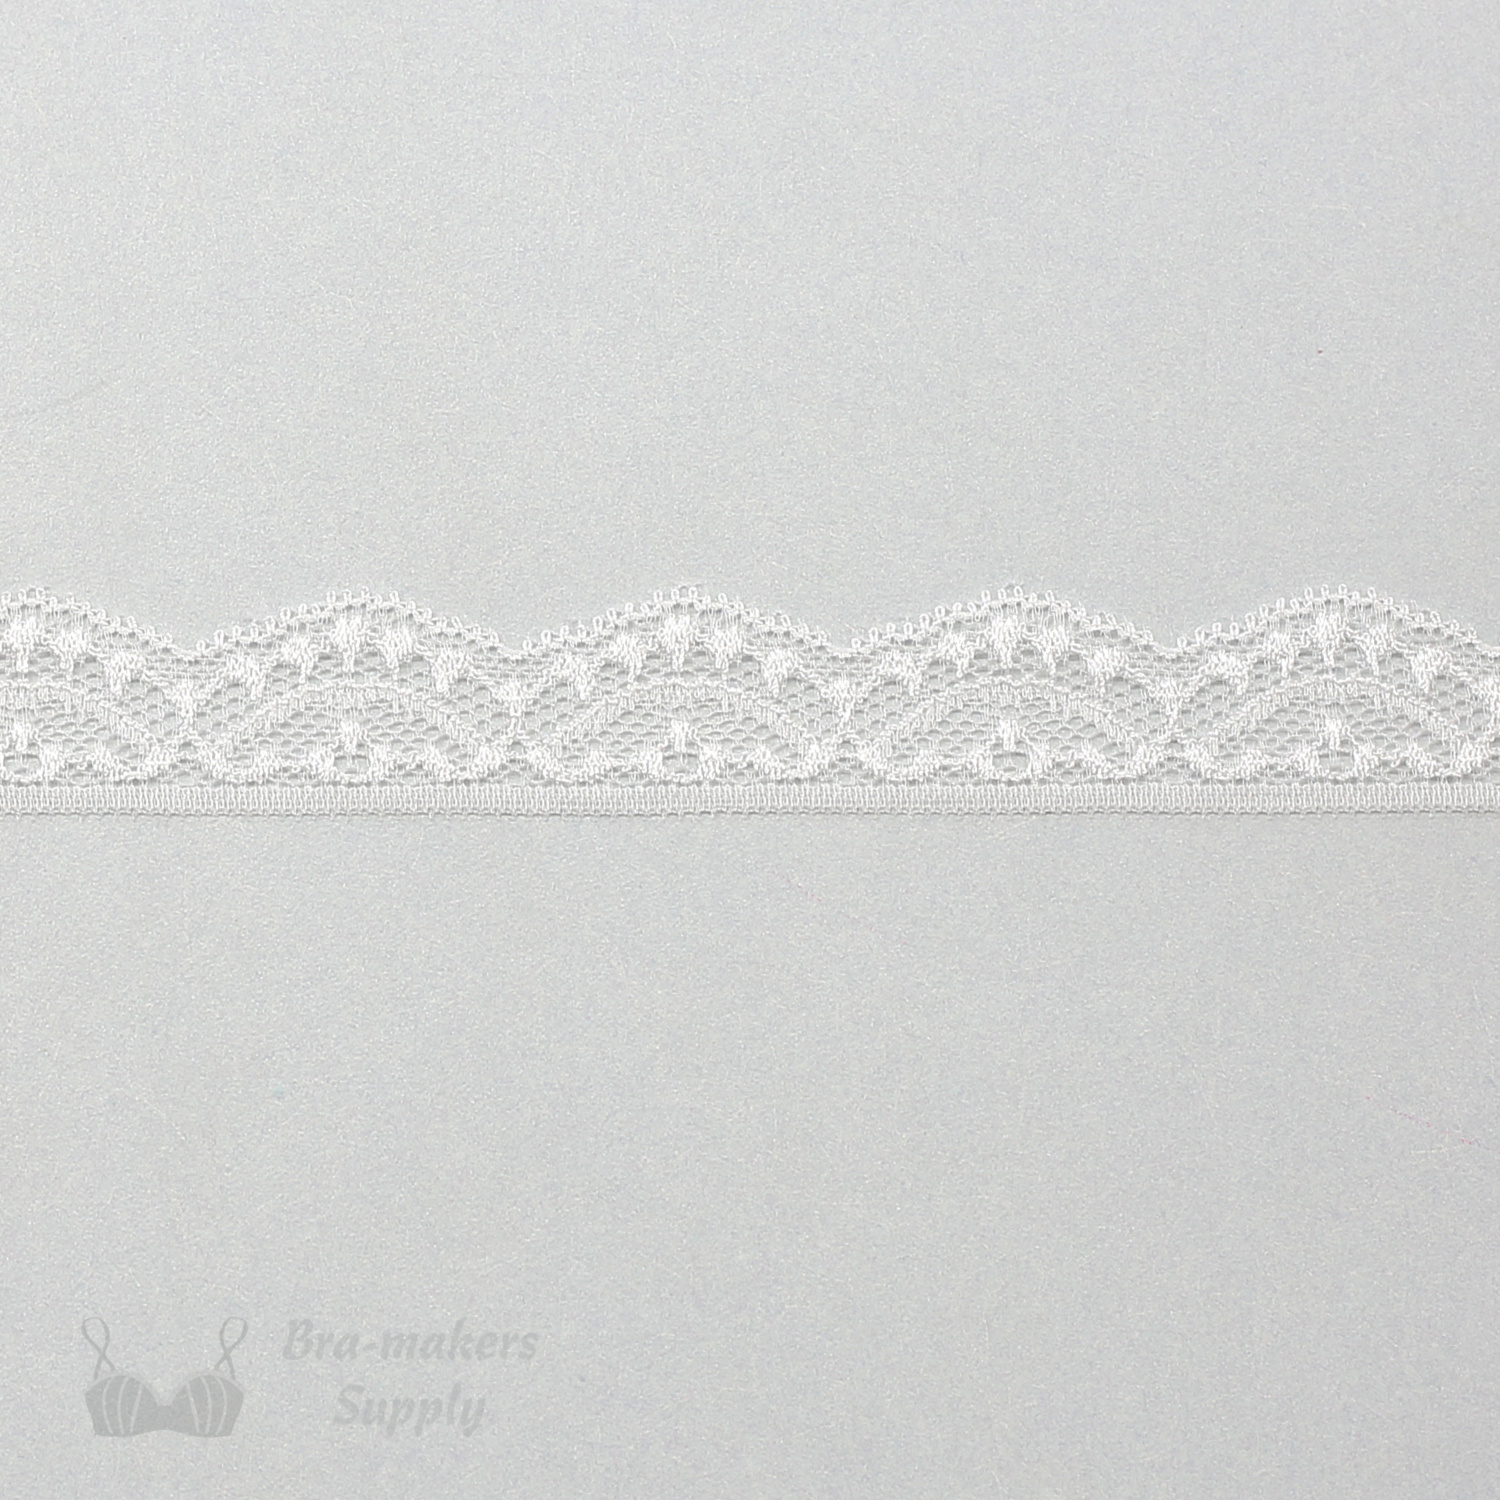 One Inch White Stretch Scalloped Lace Trim - Bra-Makers Supply